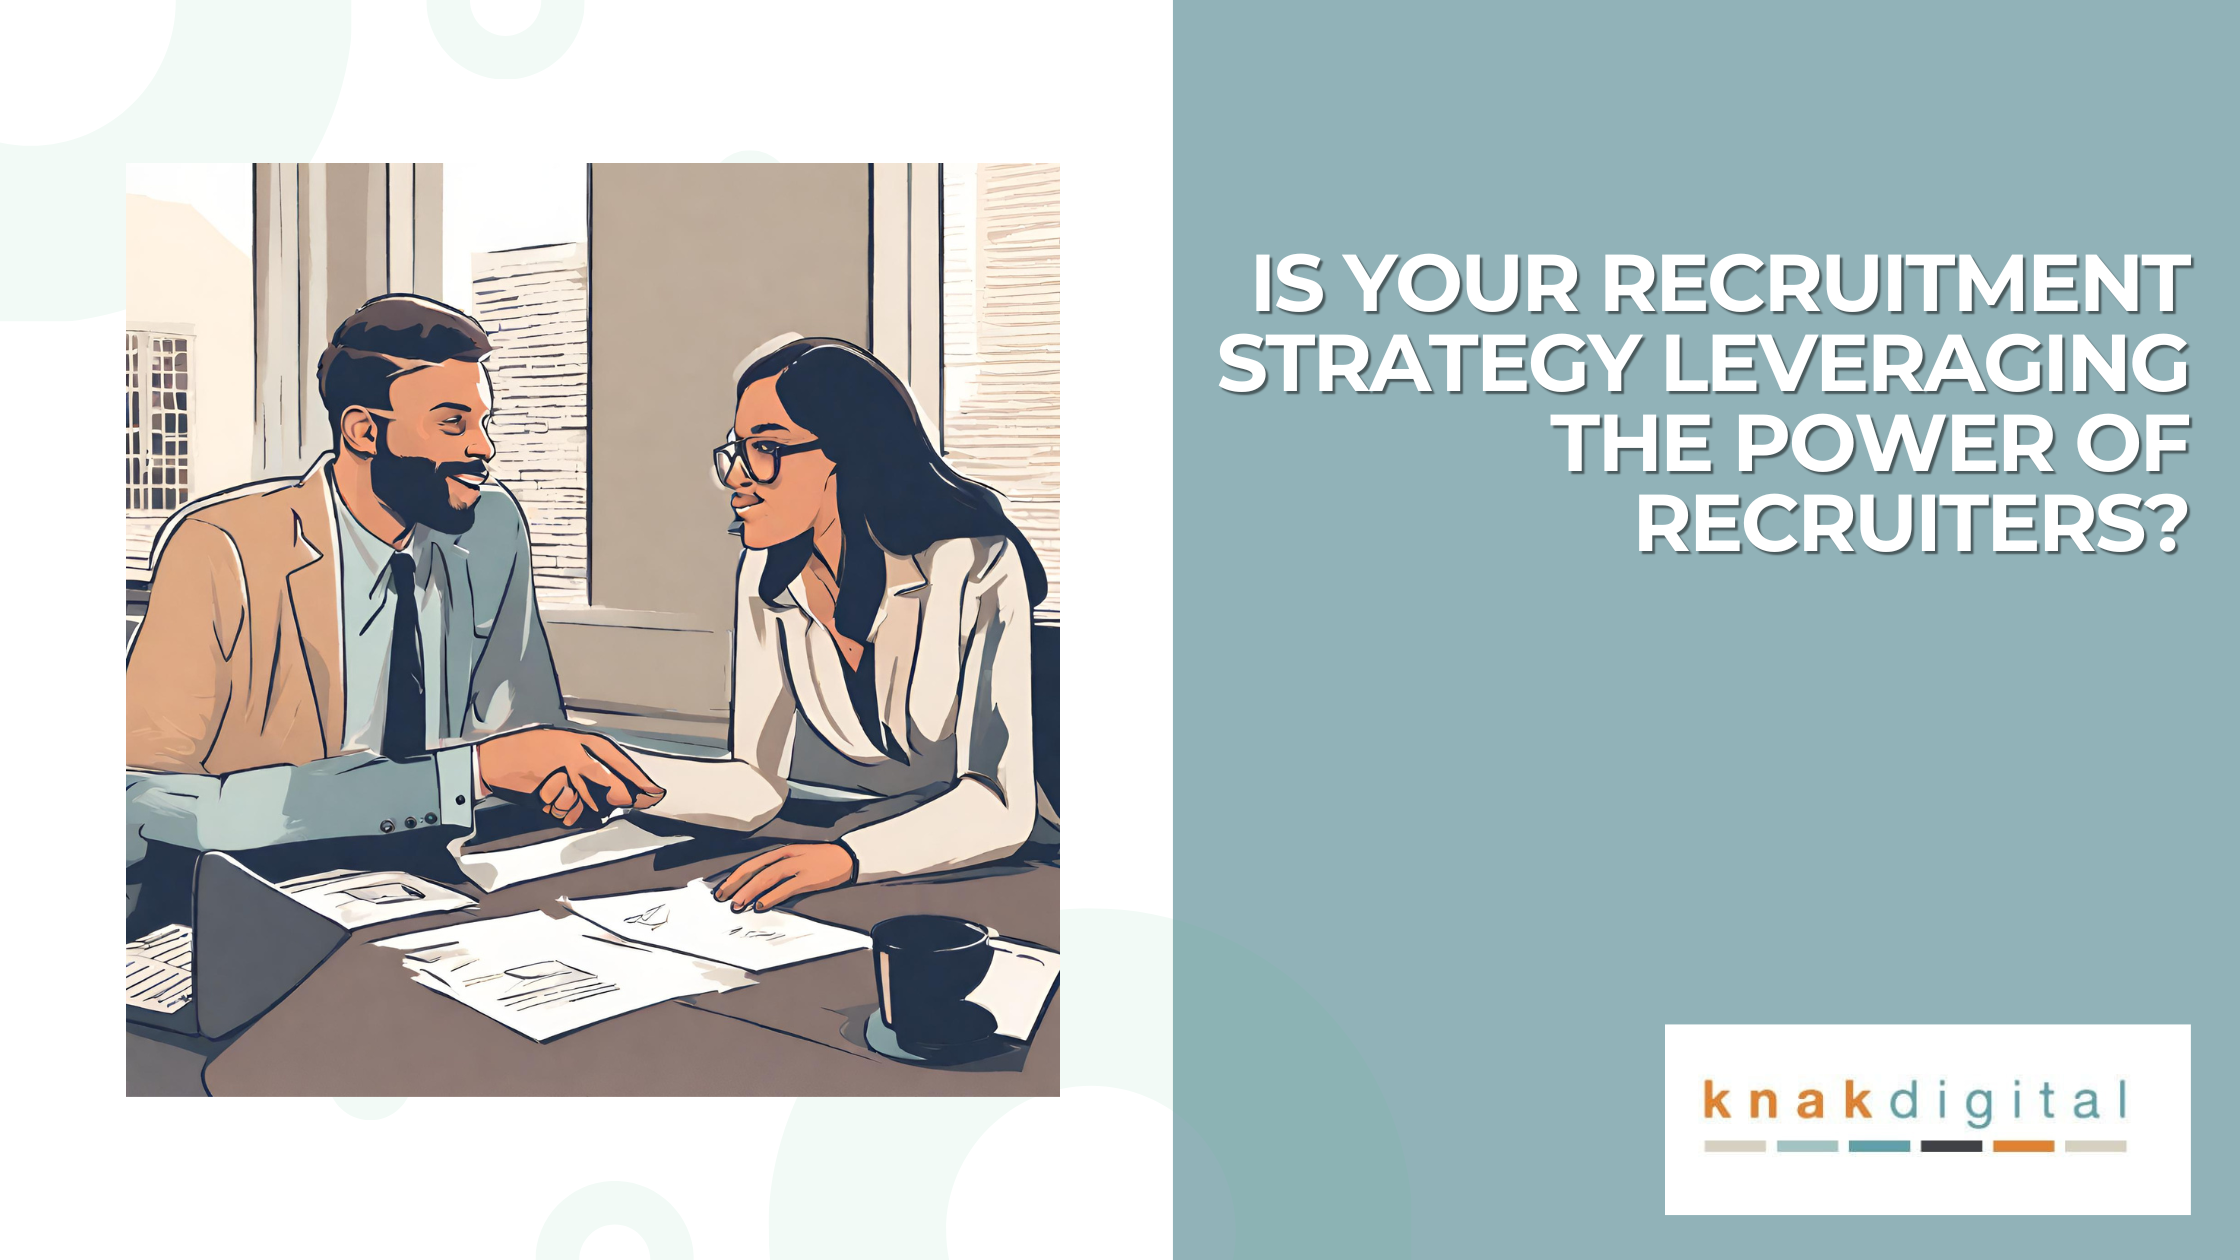 Featured image for “Is Your Recruitment Strategy Leveraging the Power of Recruiters?”